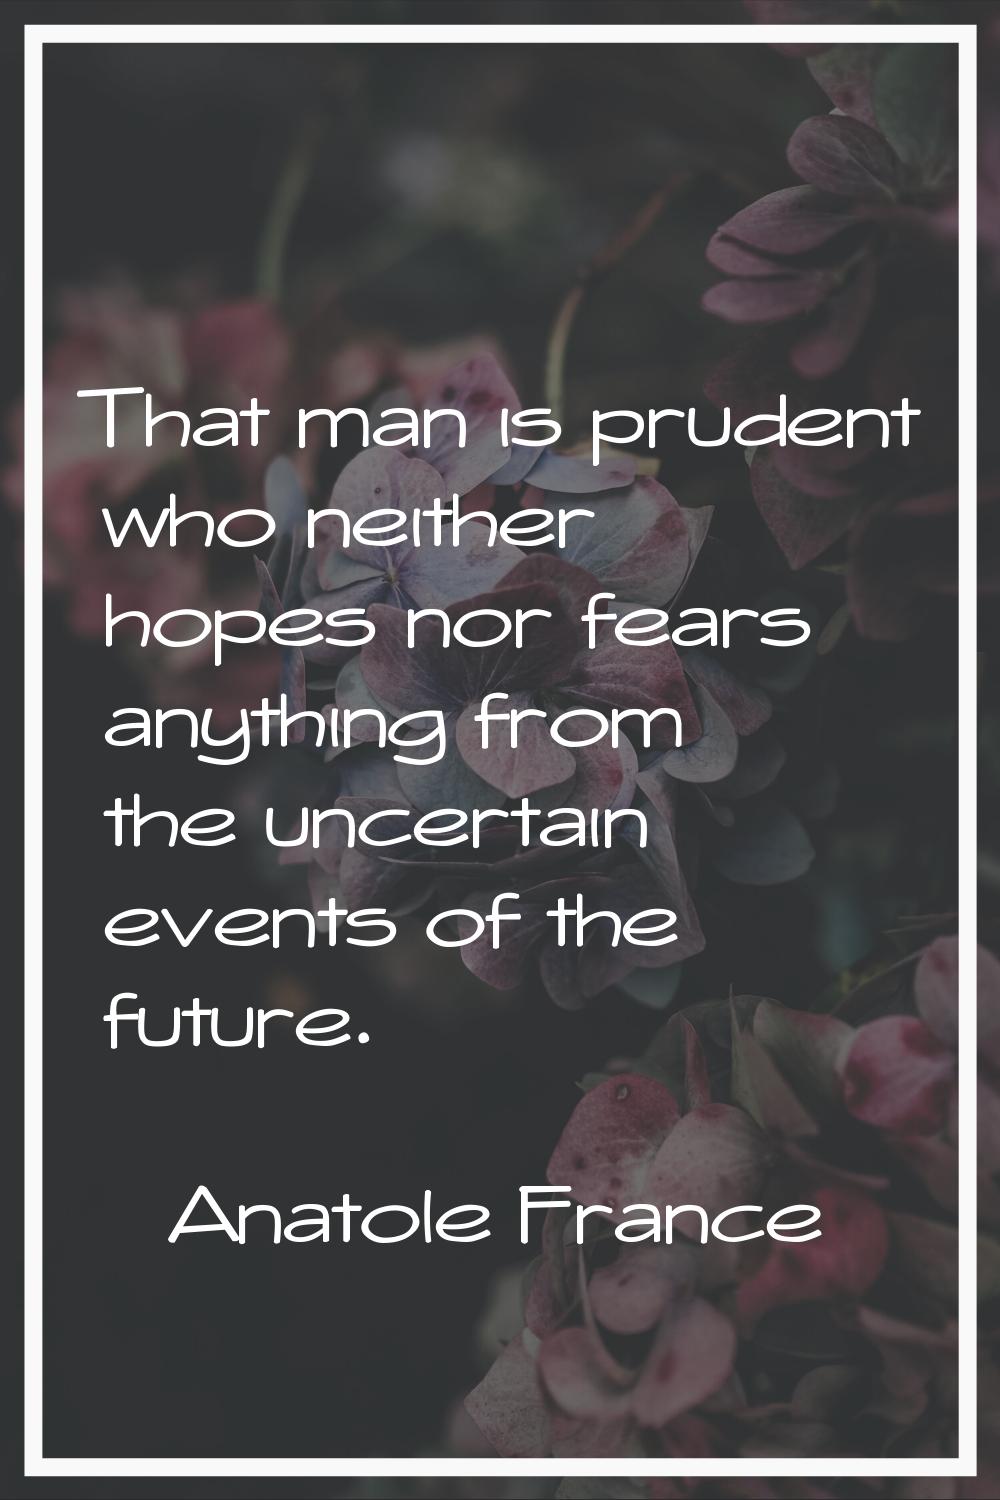 That man is prudent who neither hopes nor fears anything from the uncertain events of the future.